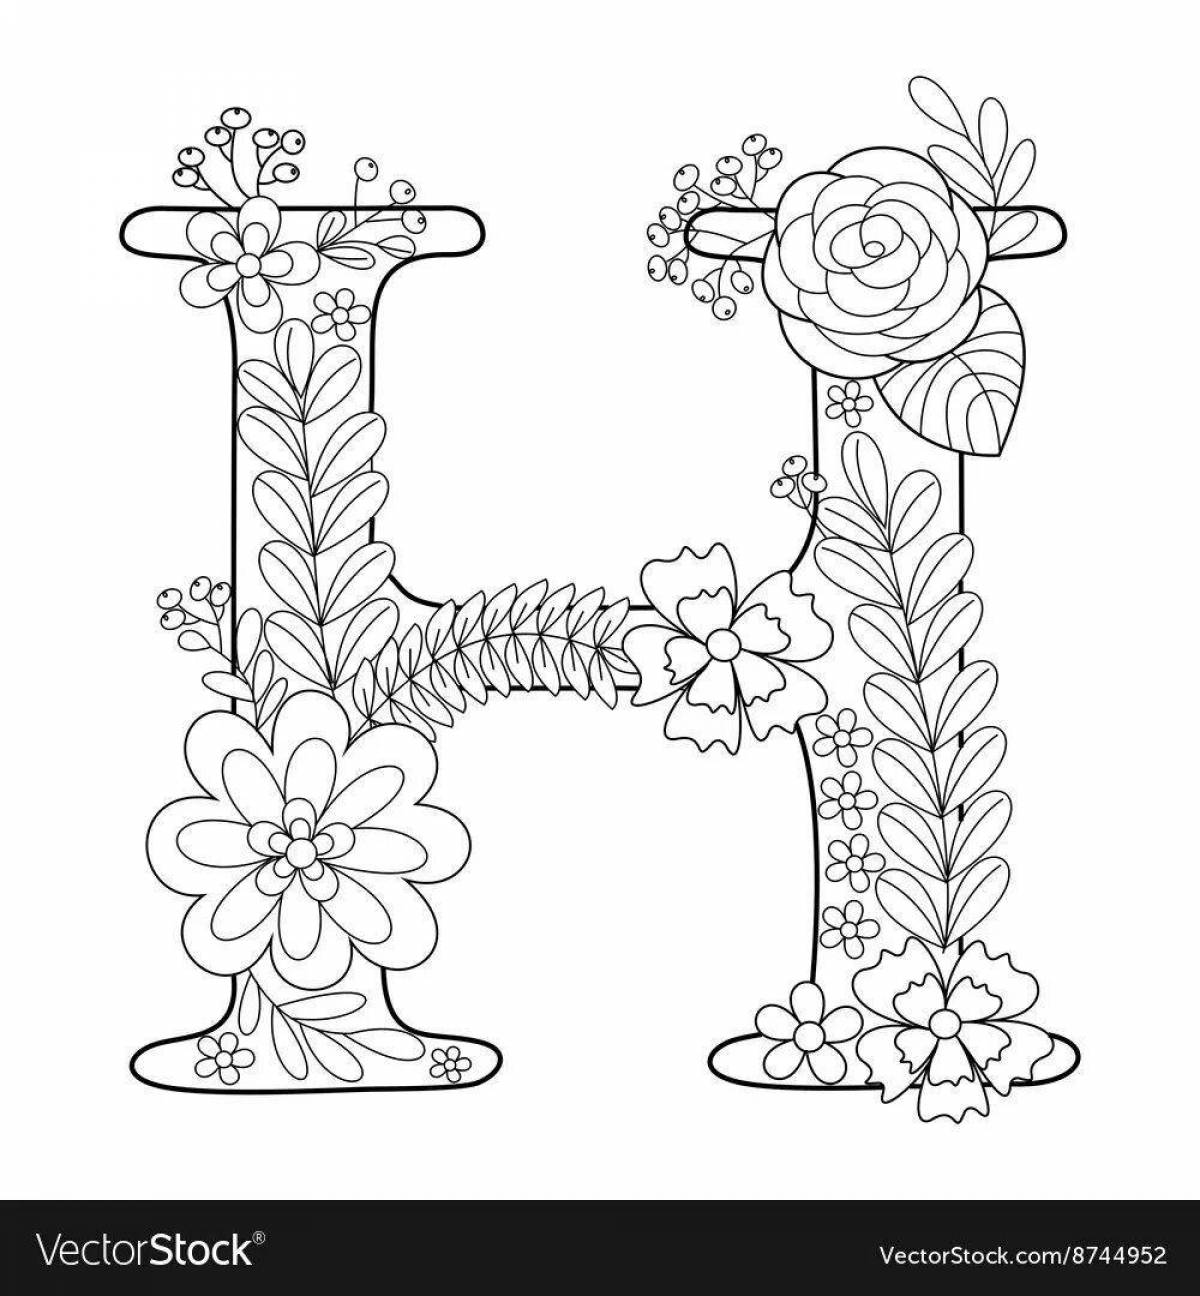 Colorful letter coloring pages with letters for kids